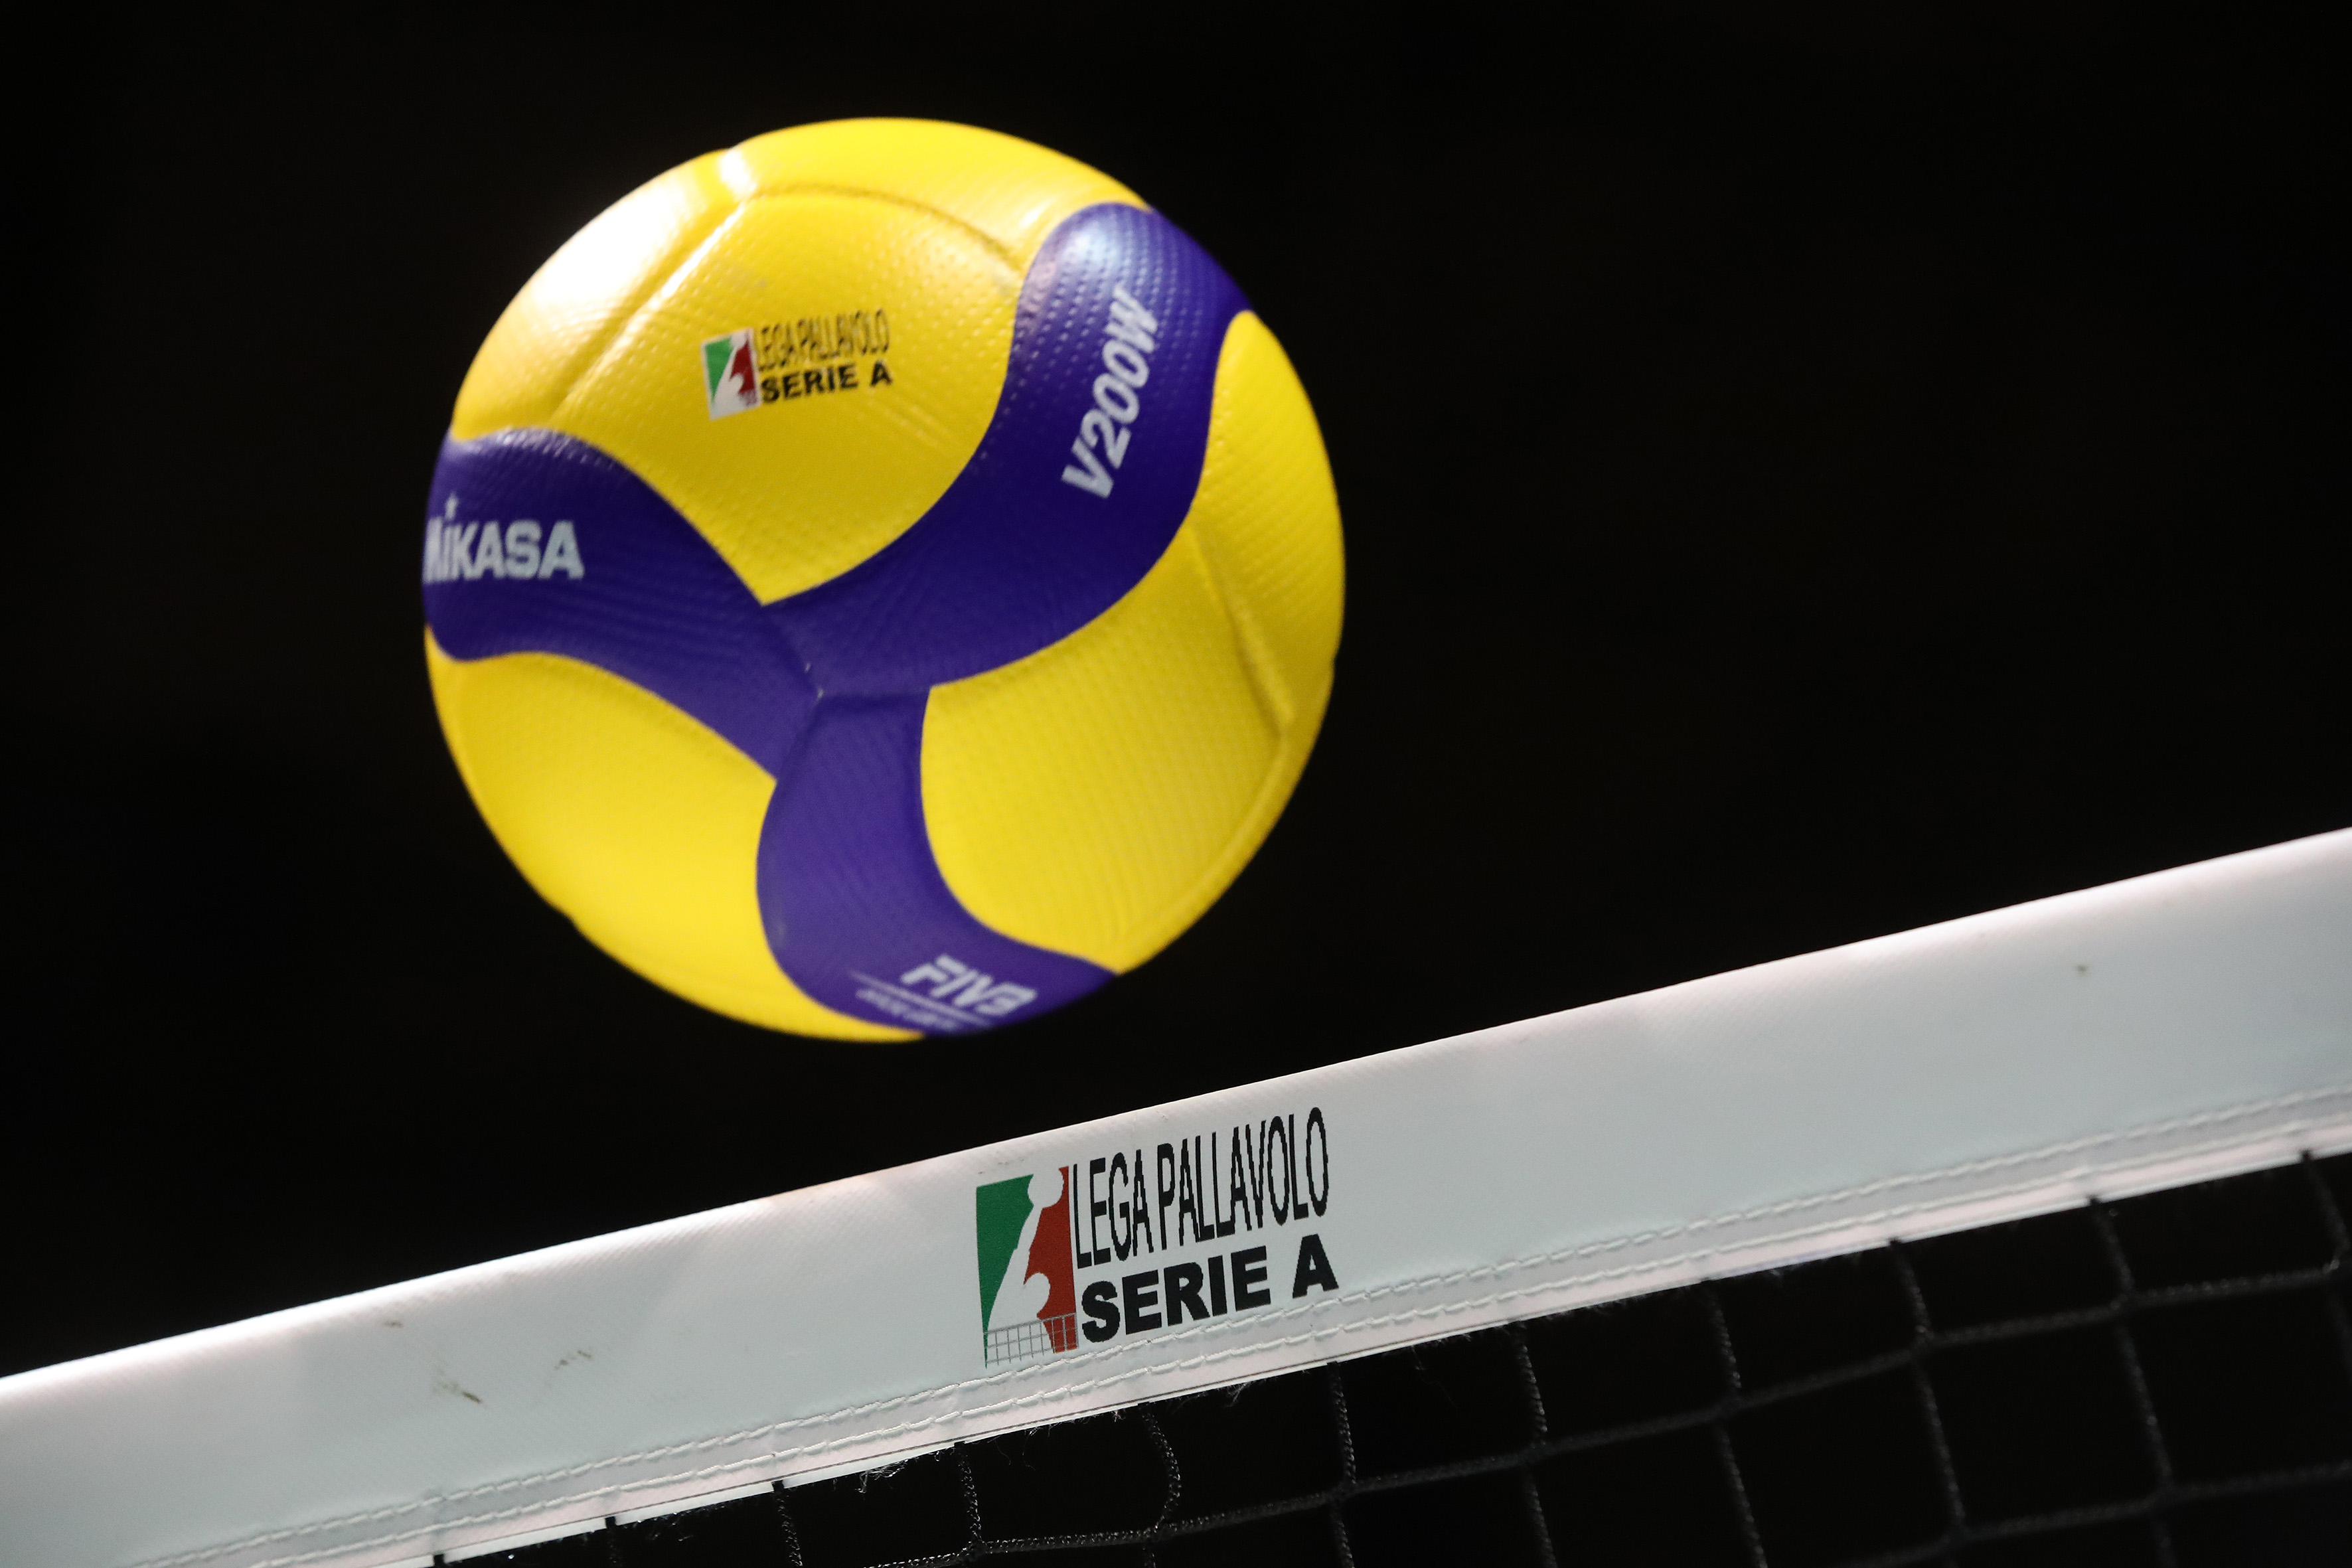 12.2 millions people interested in volleyball Lega Pallavolo Serie A